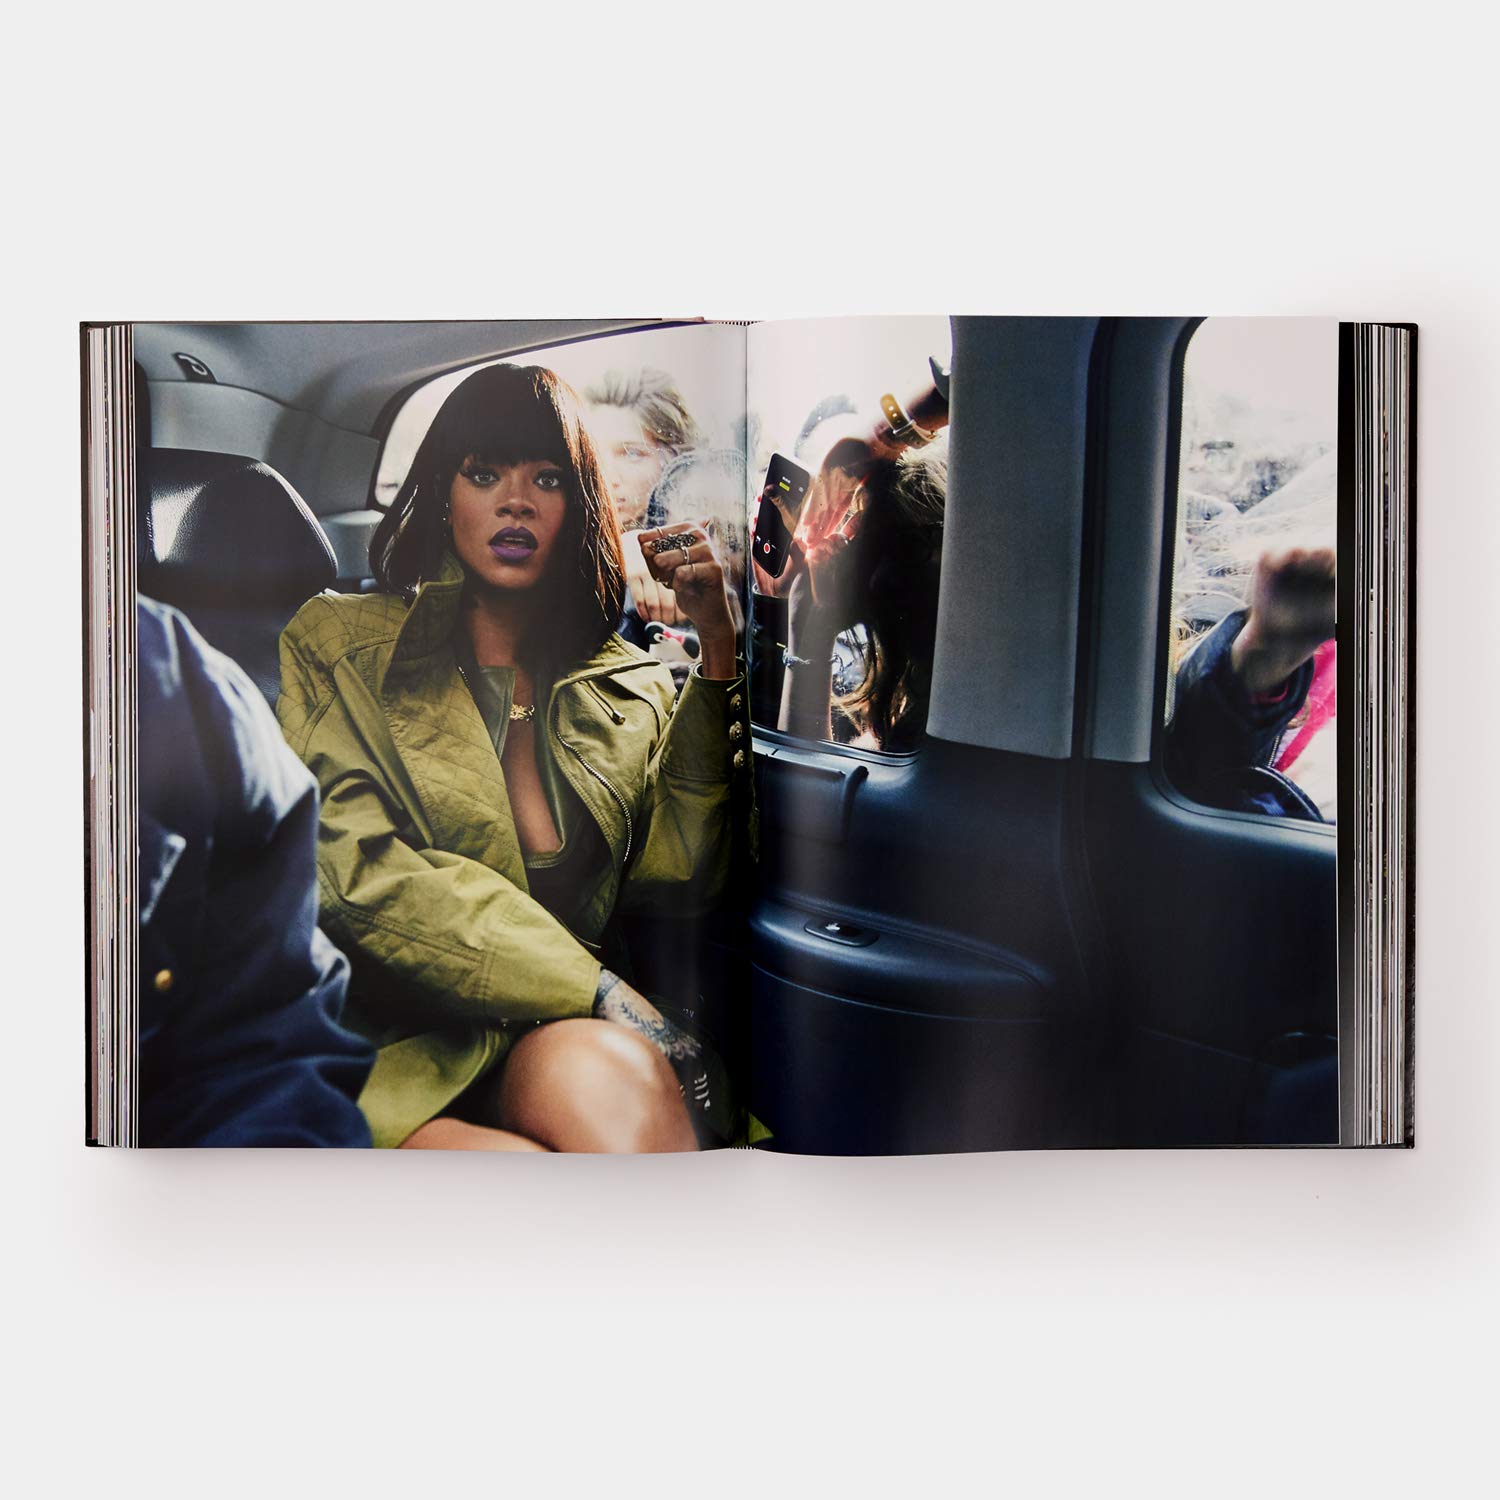 The Rihanna Book: Limited Edition (Fenty x Phaidon) featuring a Tattooed Hand Stand - Hardcover